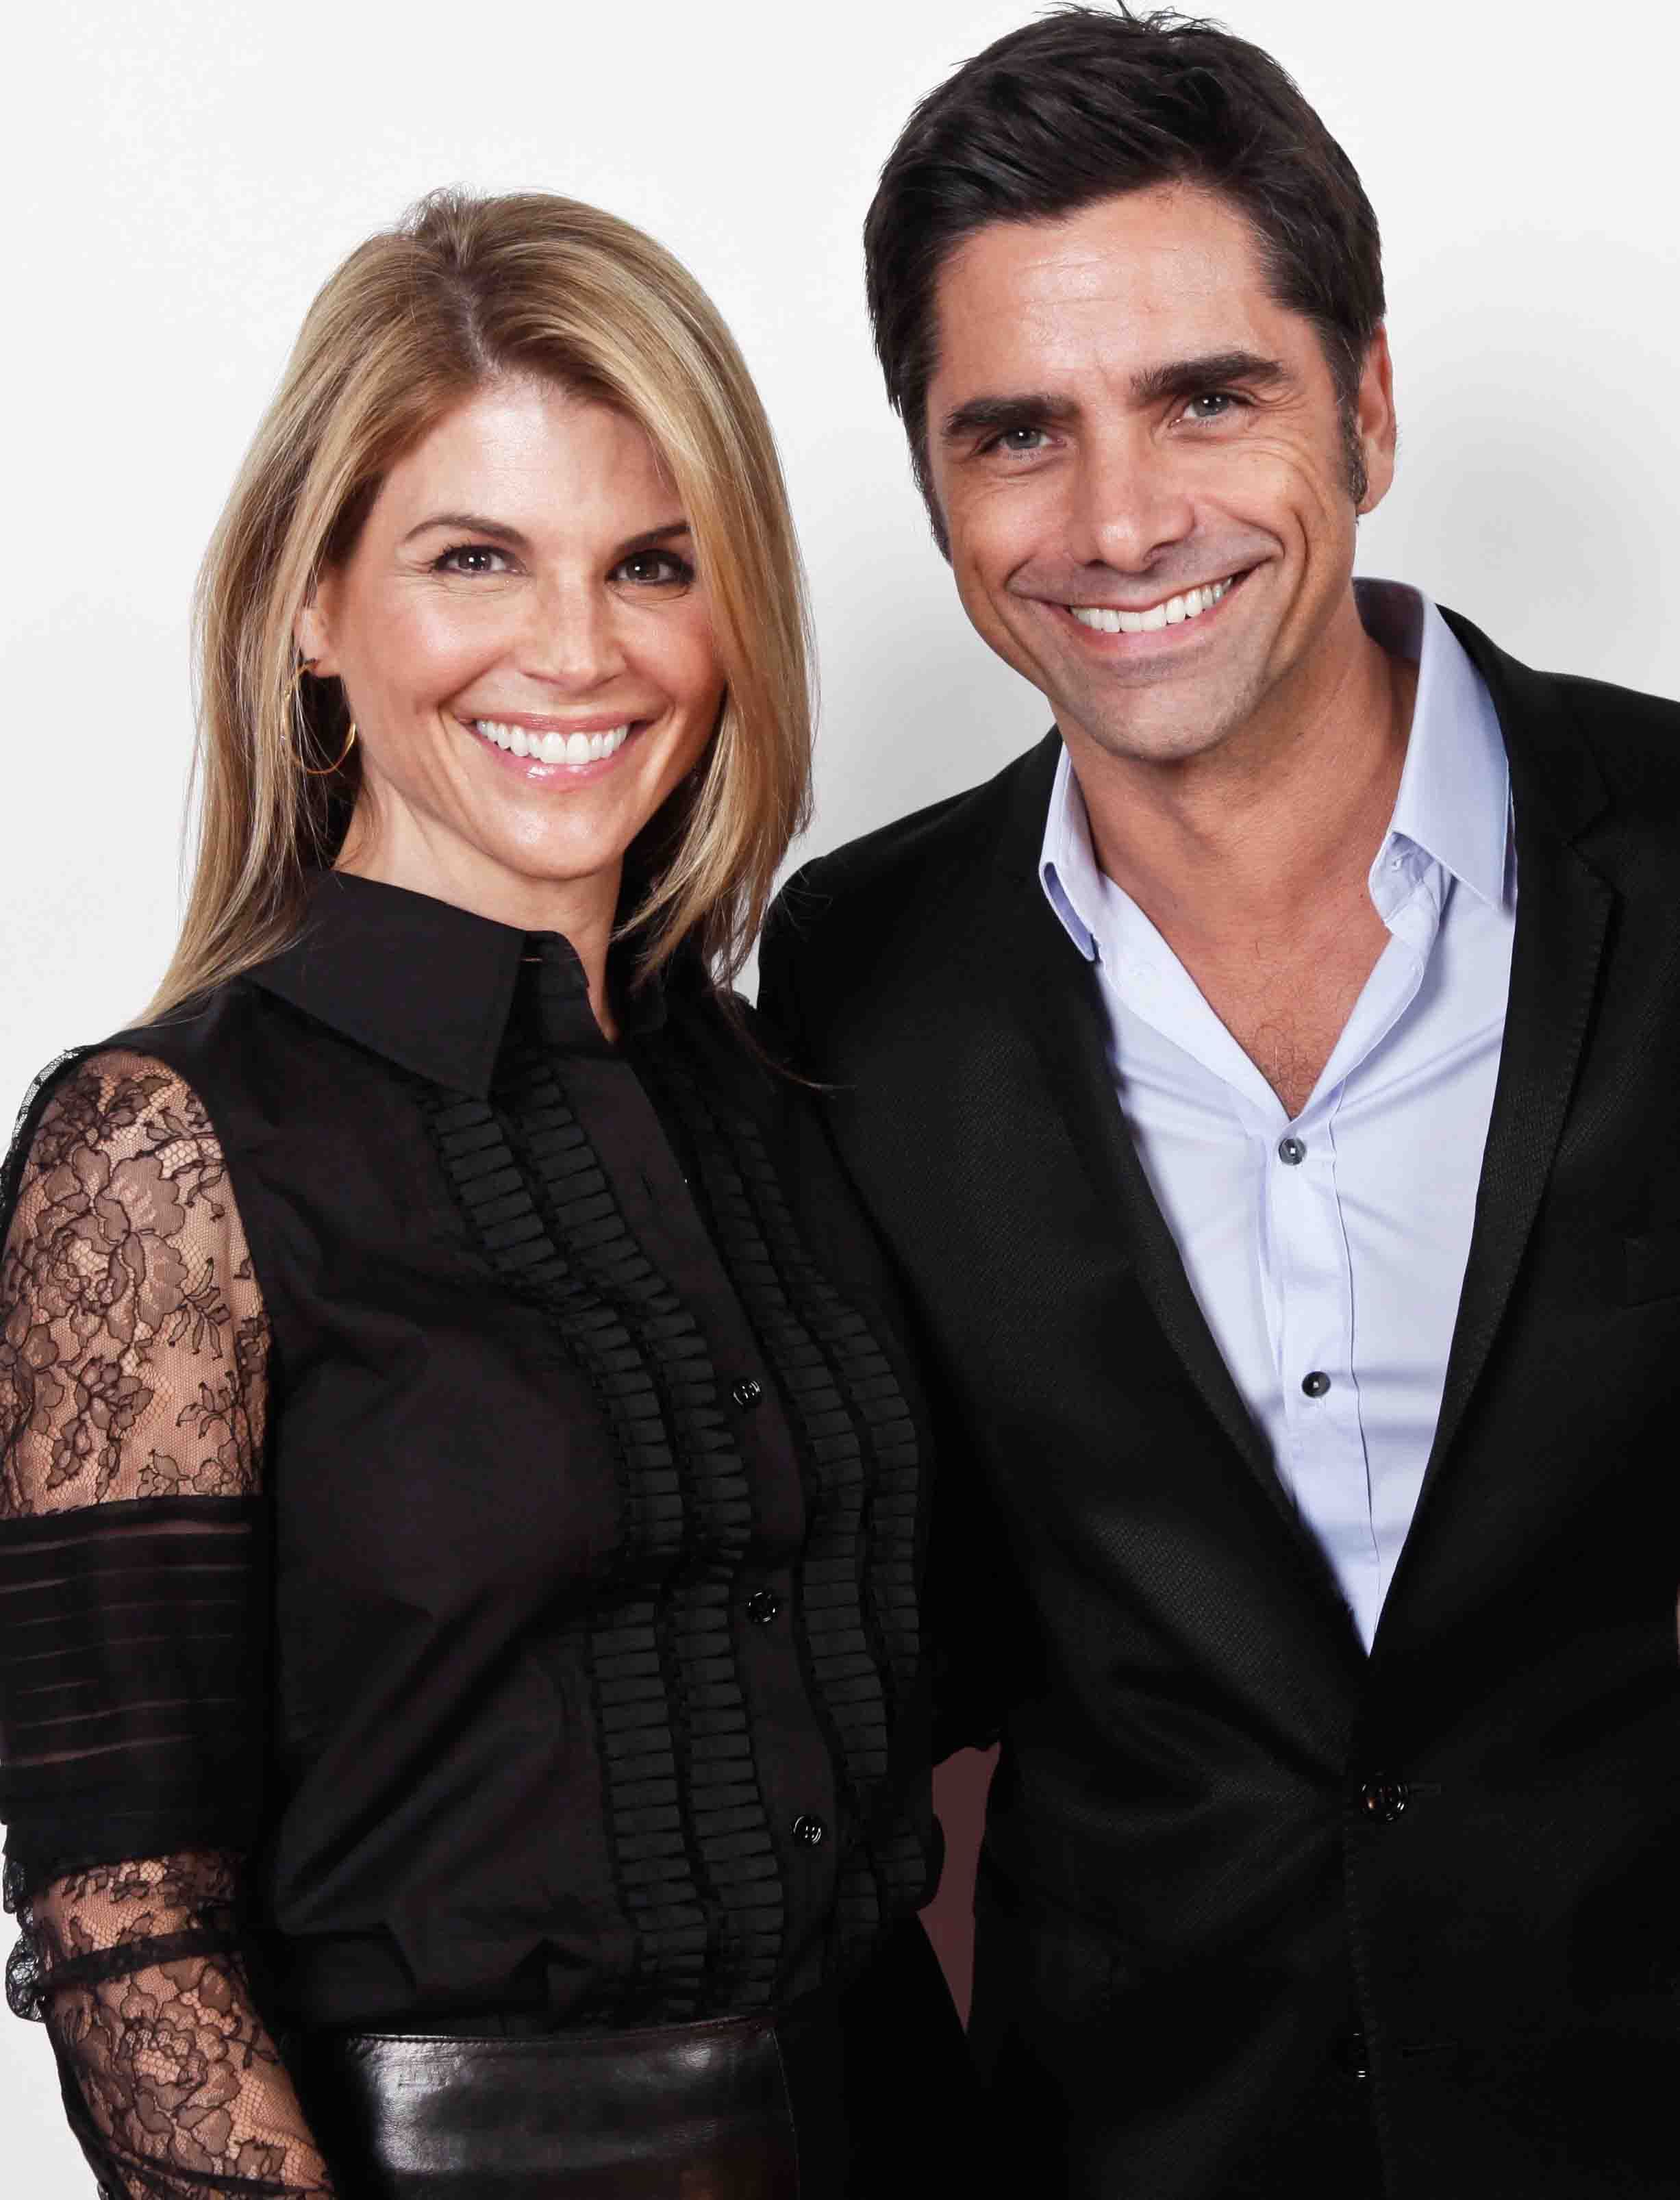 Via http://www.closerweekly.com/posts/lori-laughlin-jokes-everyone-wants-her-to-get-hitched-to-her-former-full-house-costar-john-stamos-59945